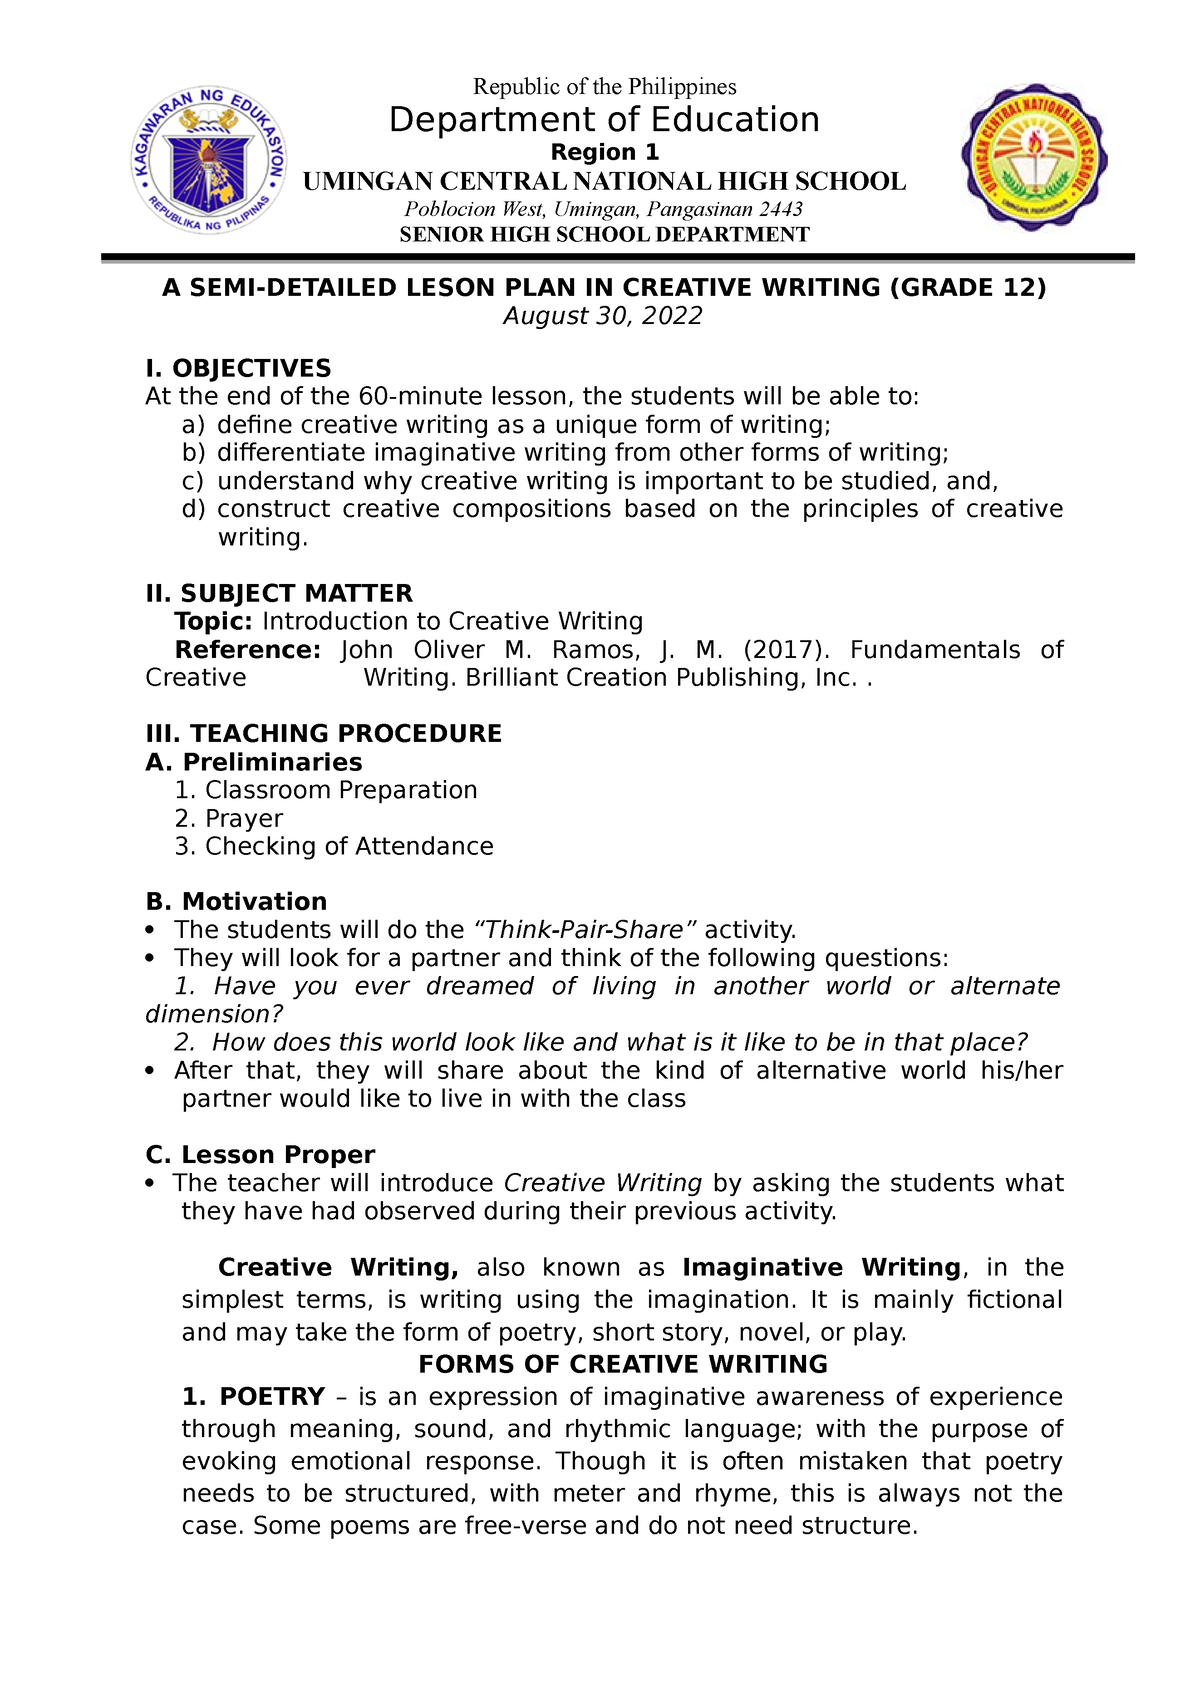 lesson plan on creative writing for grade 1